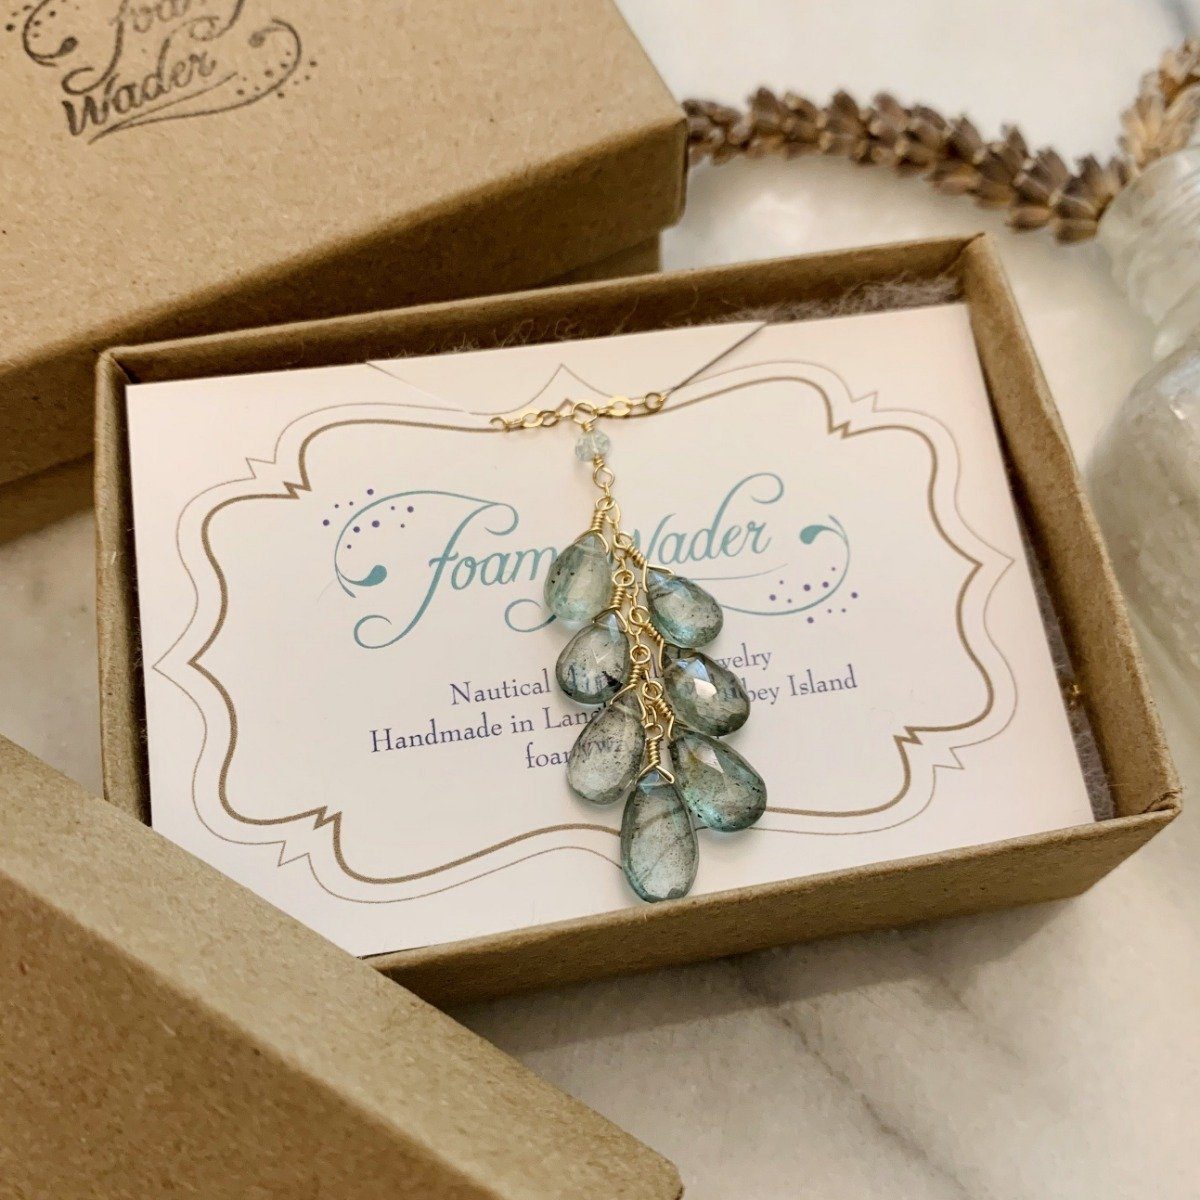 Cascades Necklace - teal moss aquamarine gemstone tendril dangle necklace in gold or silver - Foamy Wader